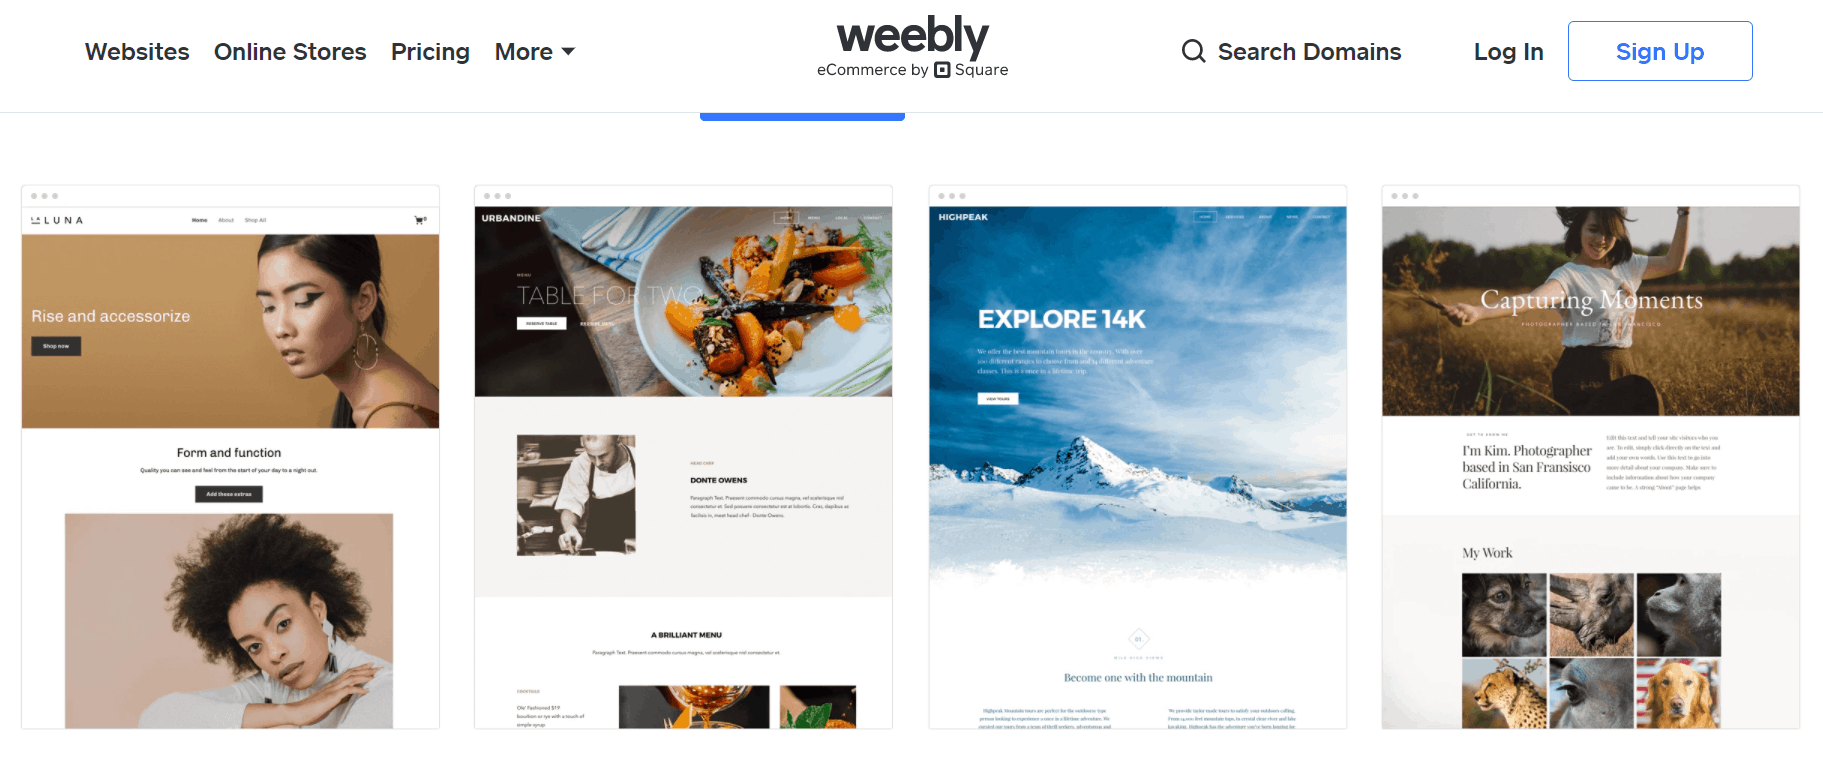 Web design software for ecommerce - Weebly